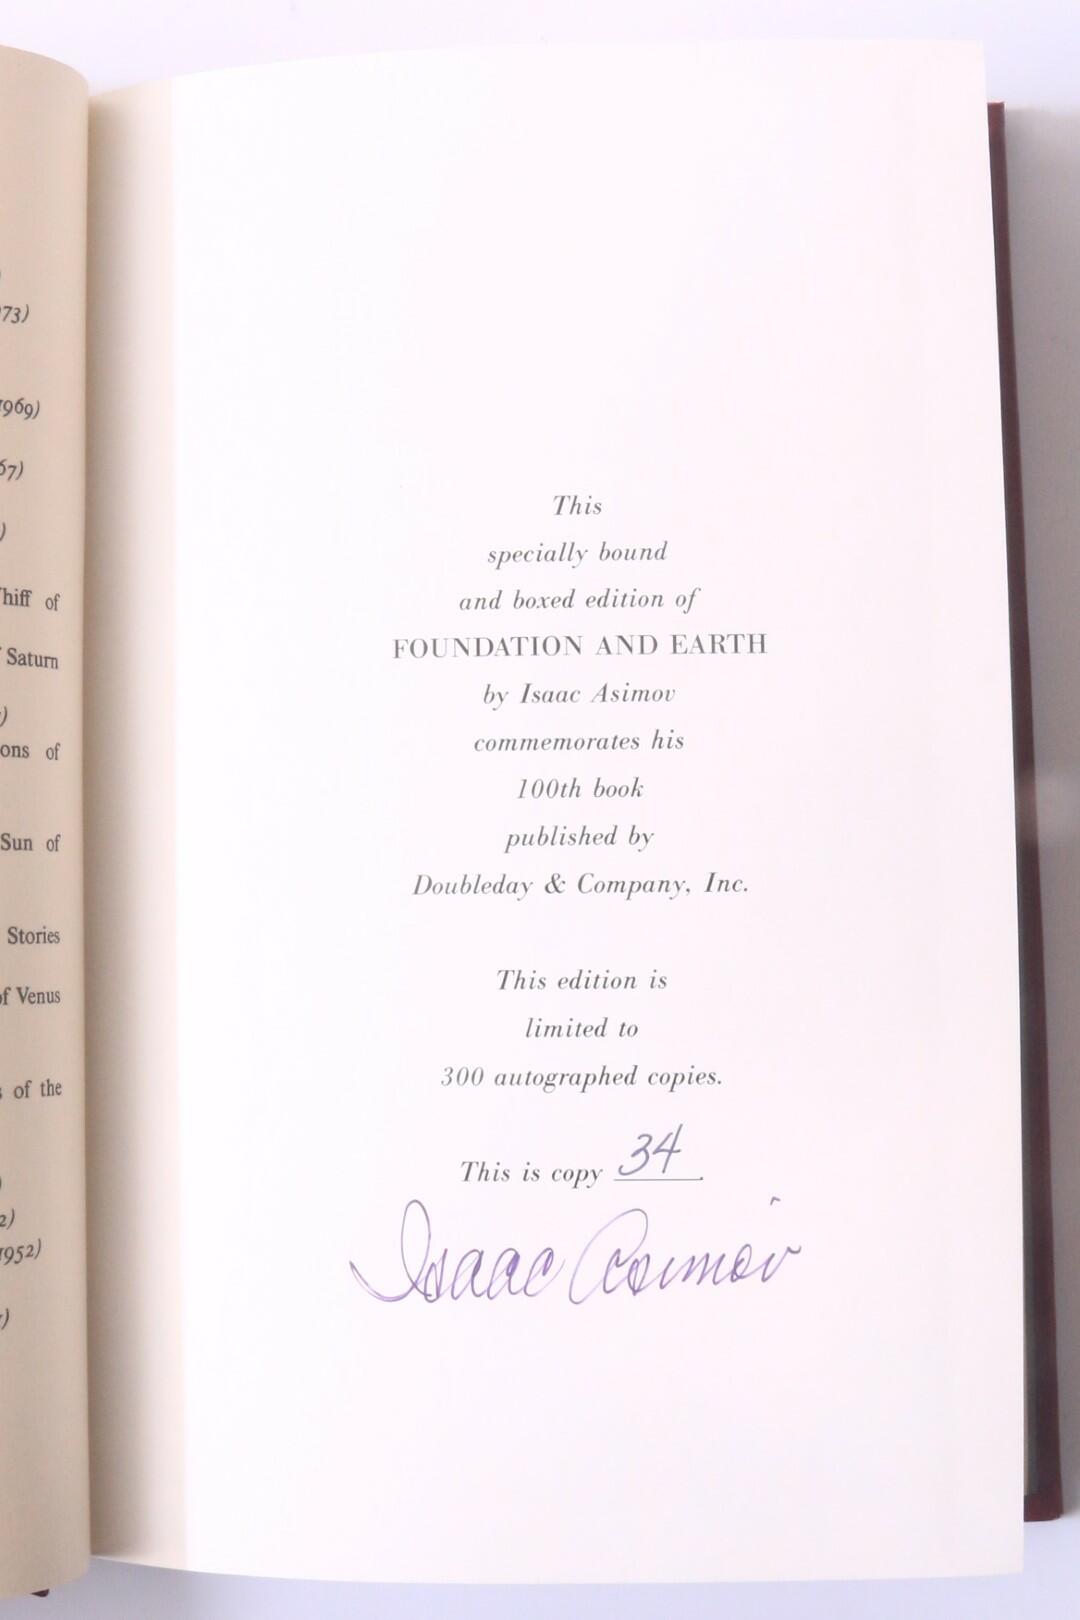 Isaac Asimov - Foundation and Earth - Doubleday, 1986, Signed Limited Edition.